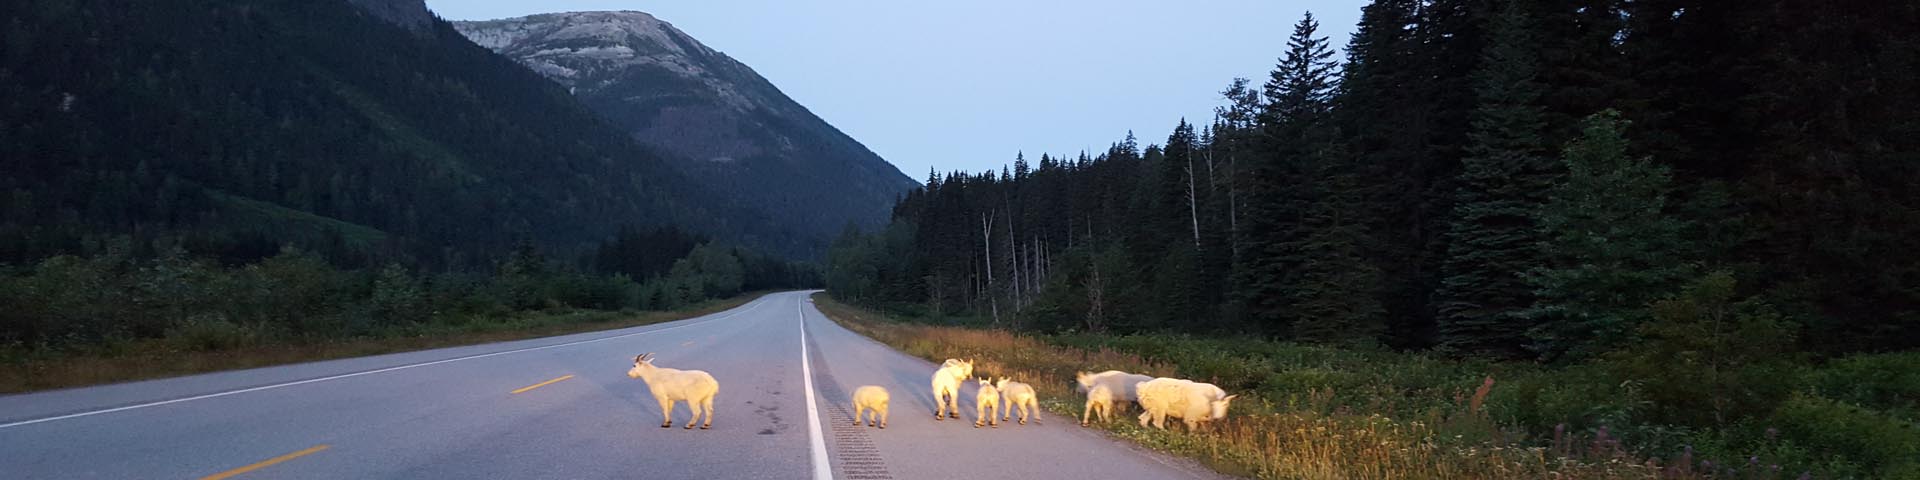 The headlights of a parked vehicle illuminate a herd of mountain goats on the side of an empty highway at dusk.